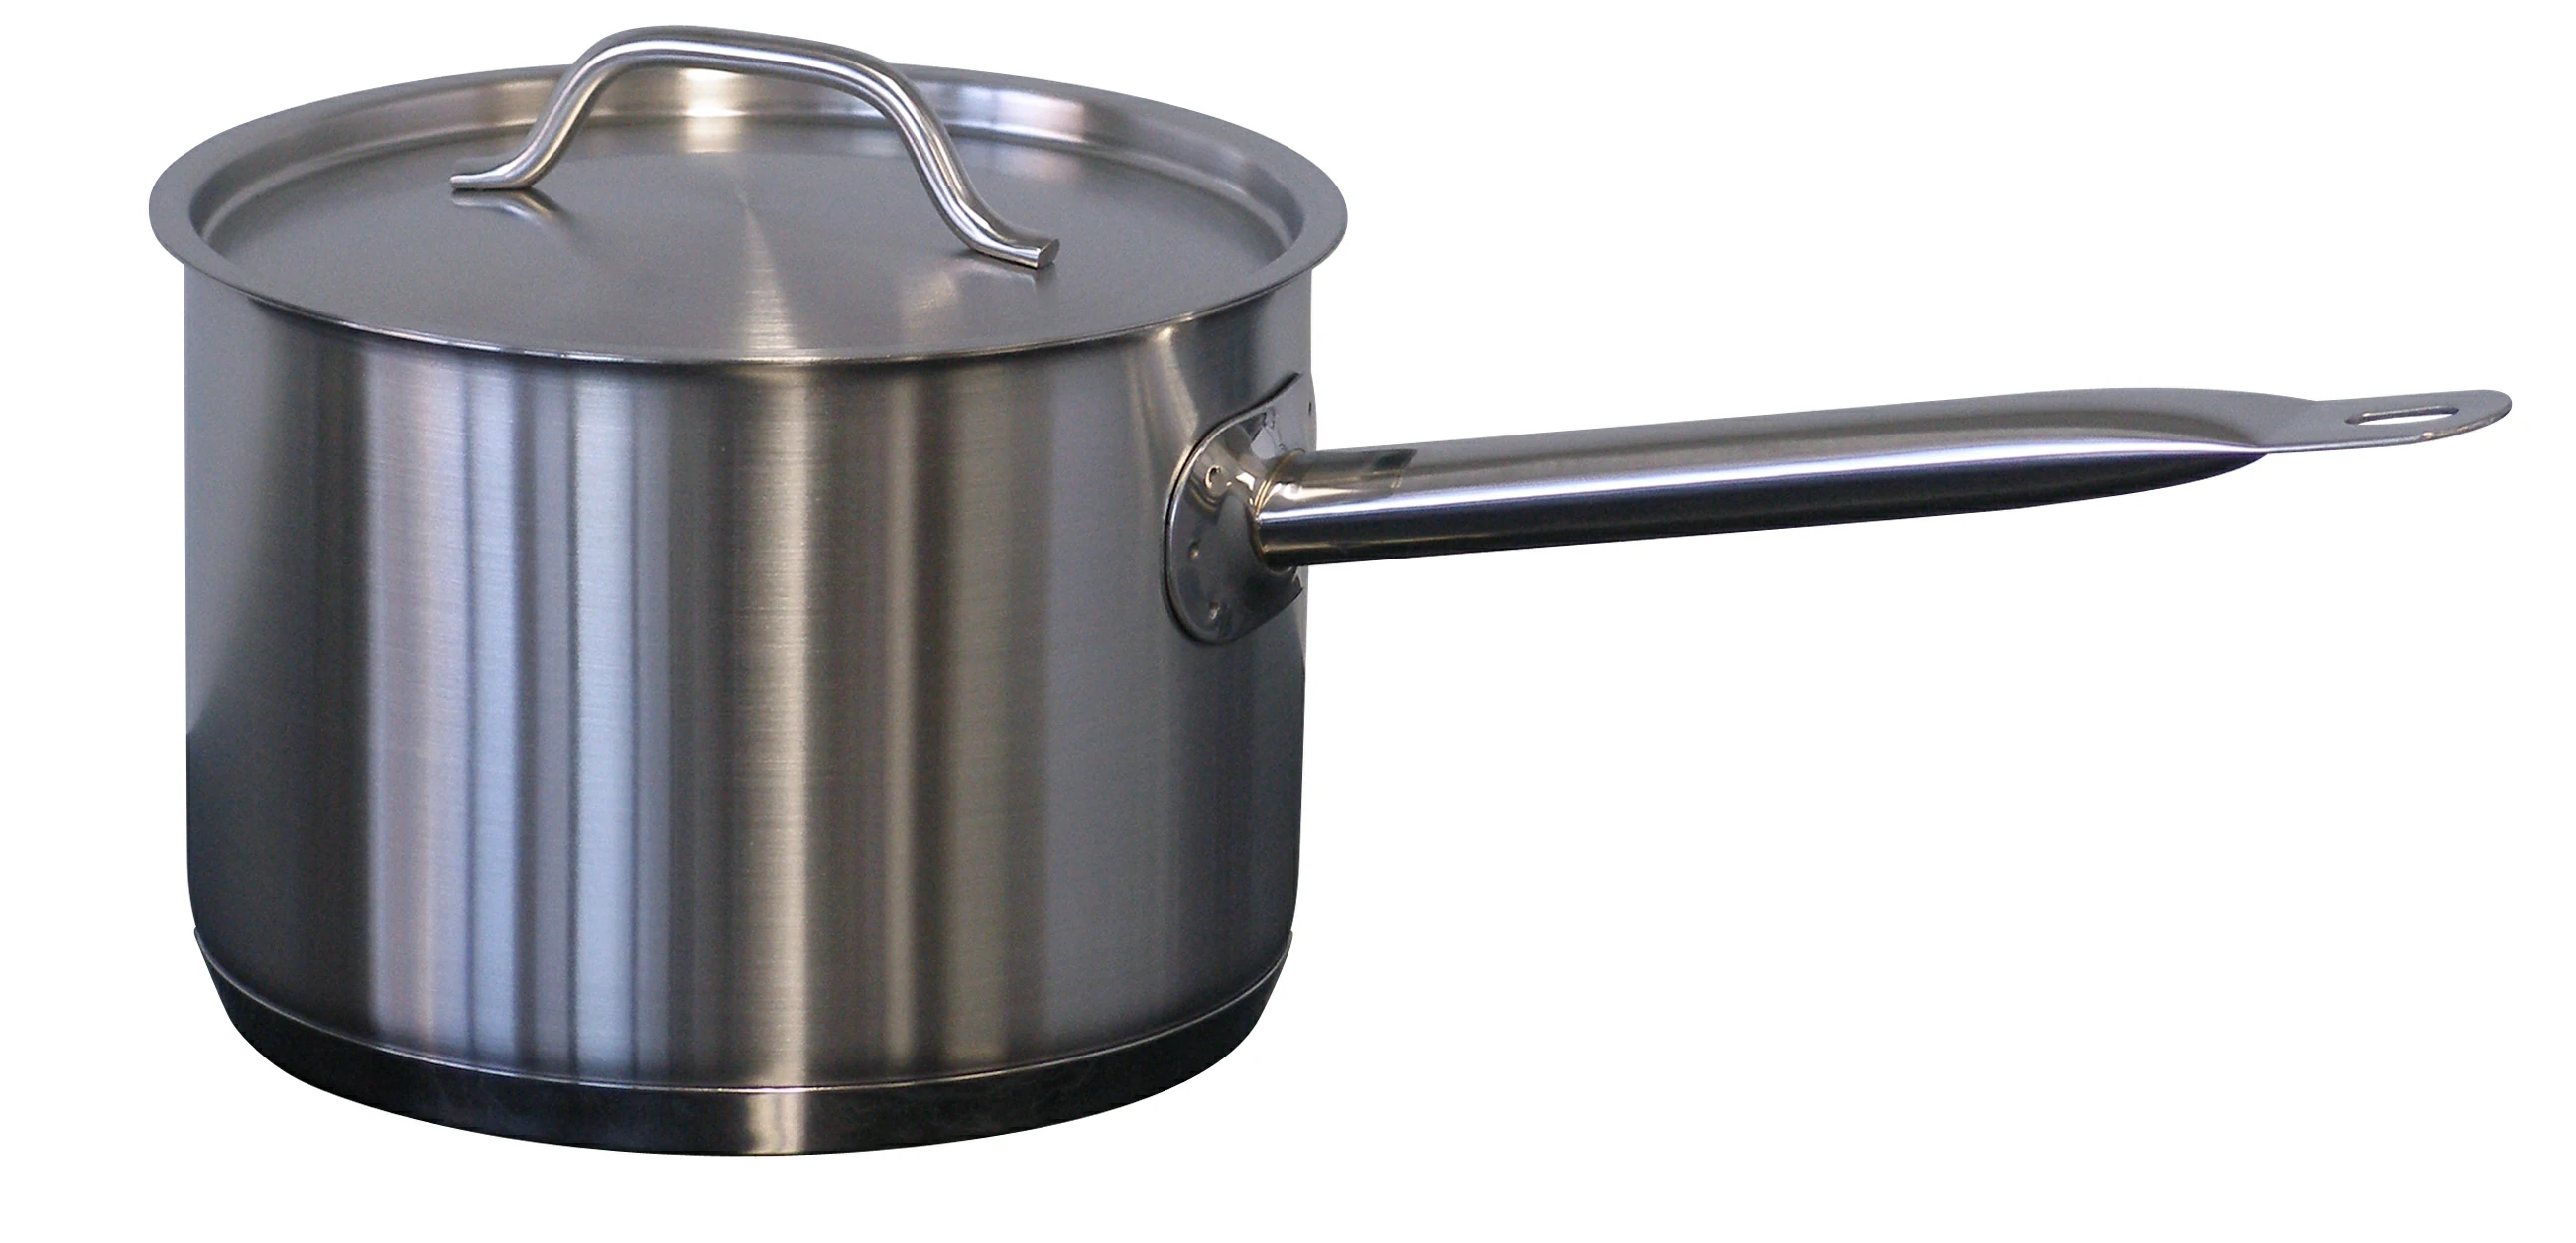 Forje SH4 Stainless steel 4.4 litre high saucepan